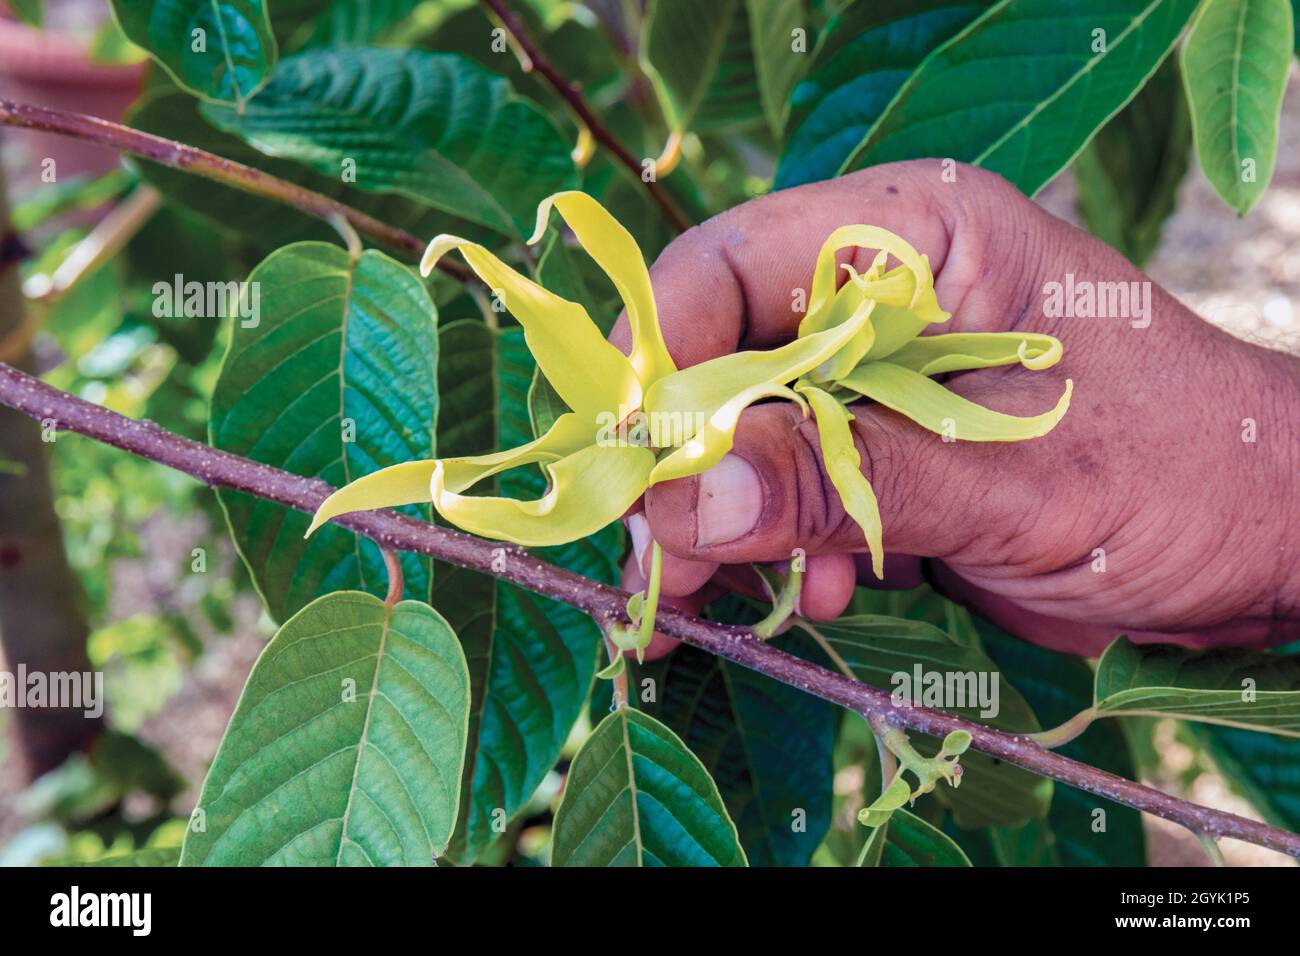 Ylang Ylang flower, Cananga odorata, also known as the cananga tree, Mauritius, Mascarene Islands.  Perfume is extracted from the tree's flowers and i Stock Photo